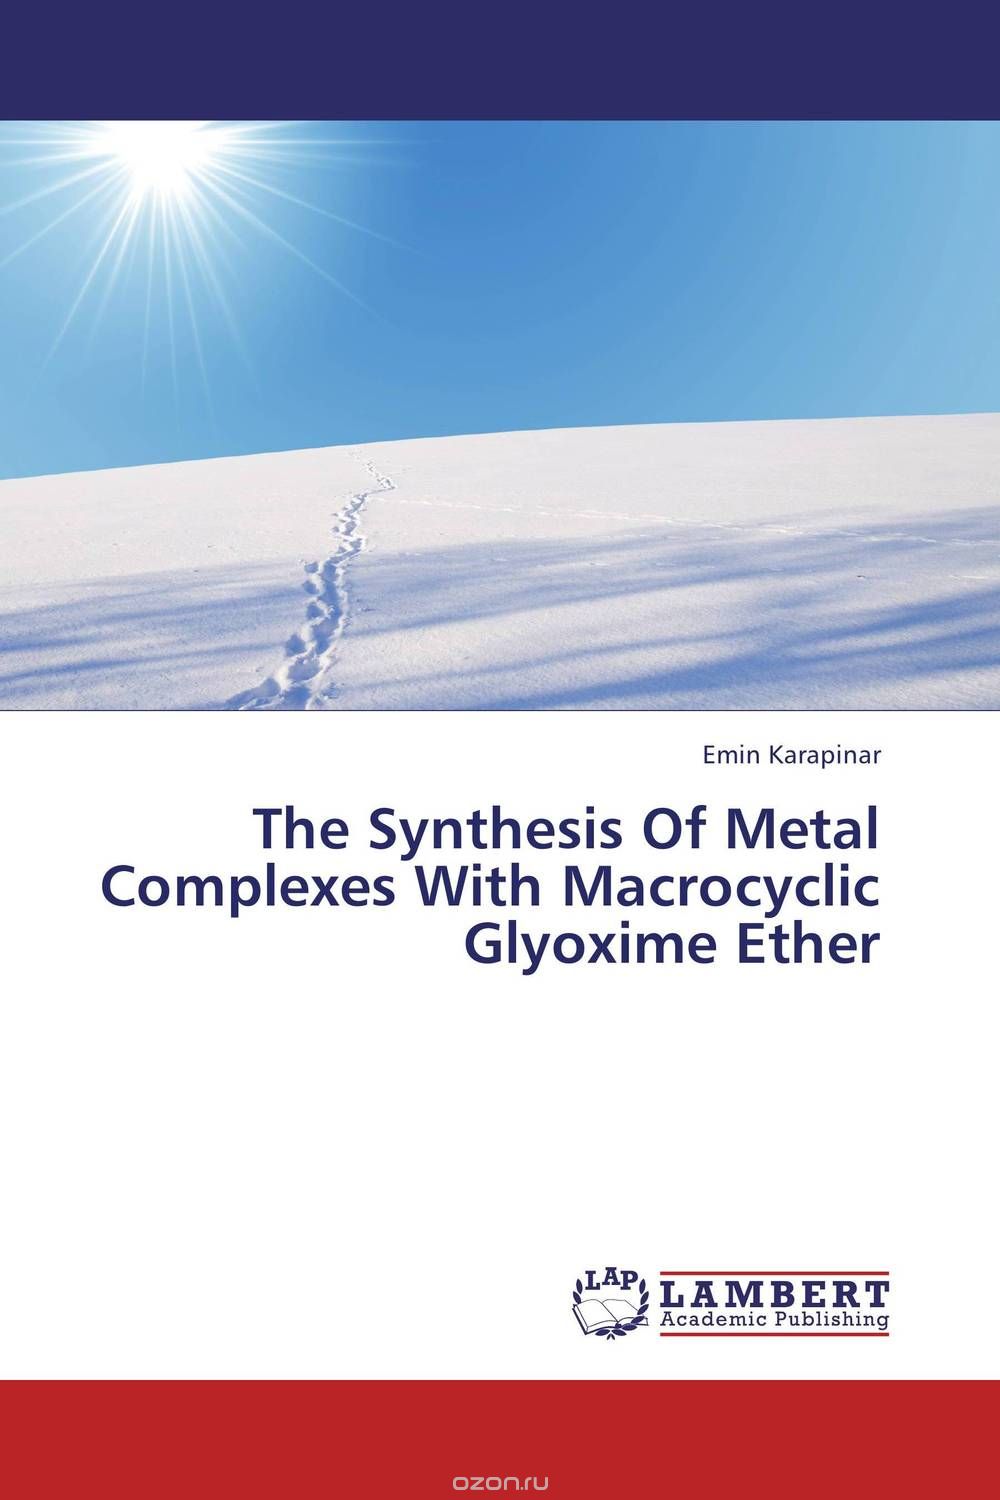 Скачать книгу "The Synthesis Of Metal Complexes With Macrocyclic Glyoxime Ether"